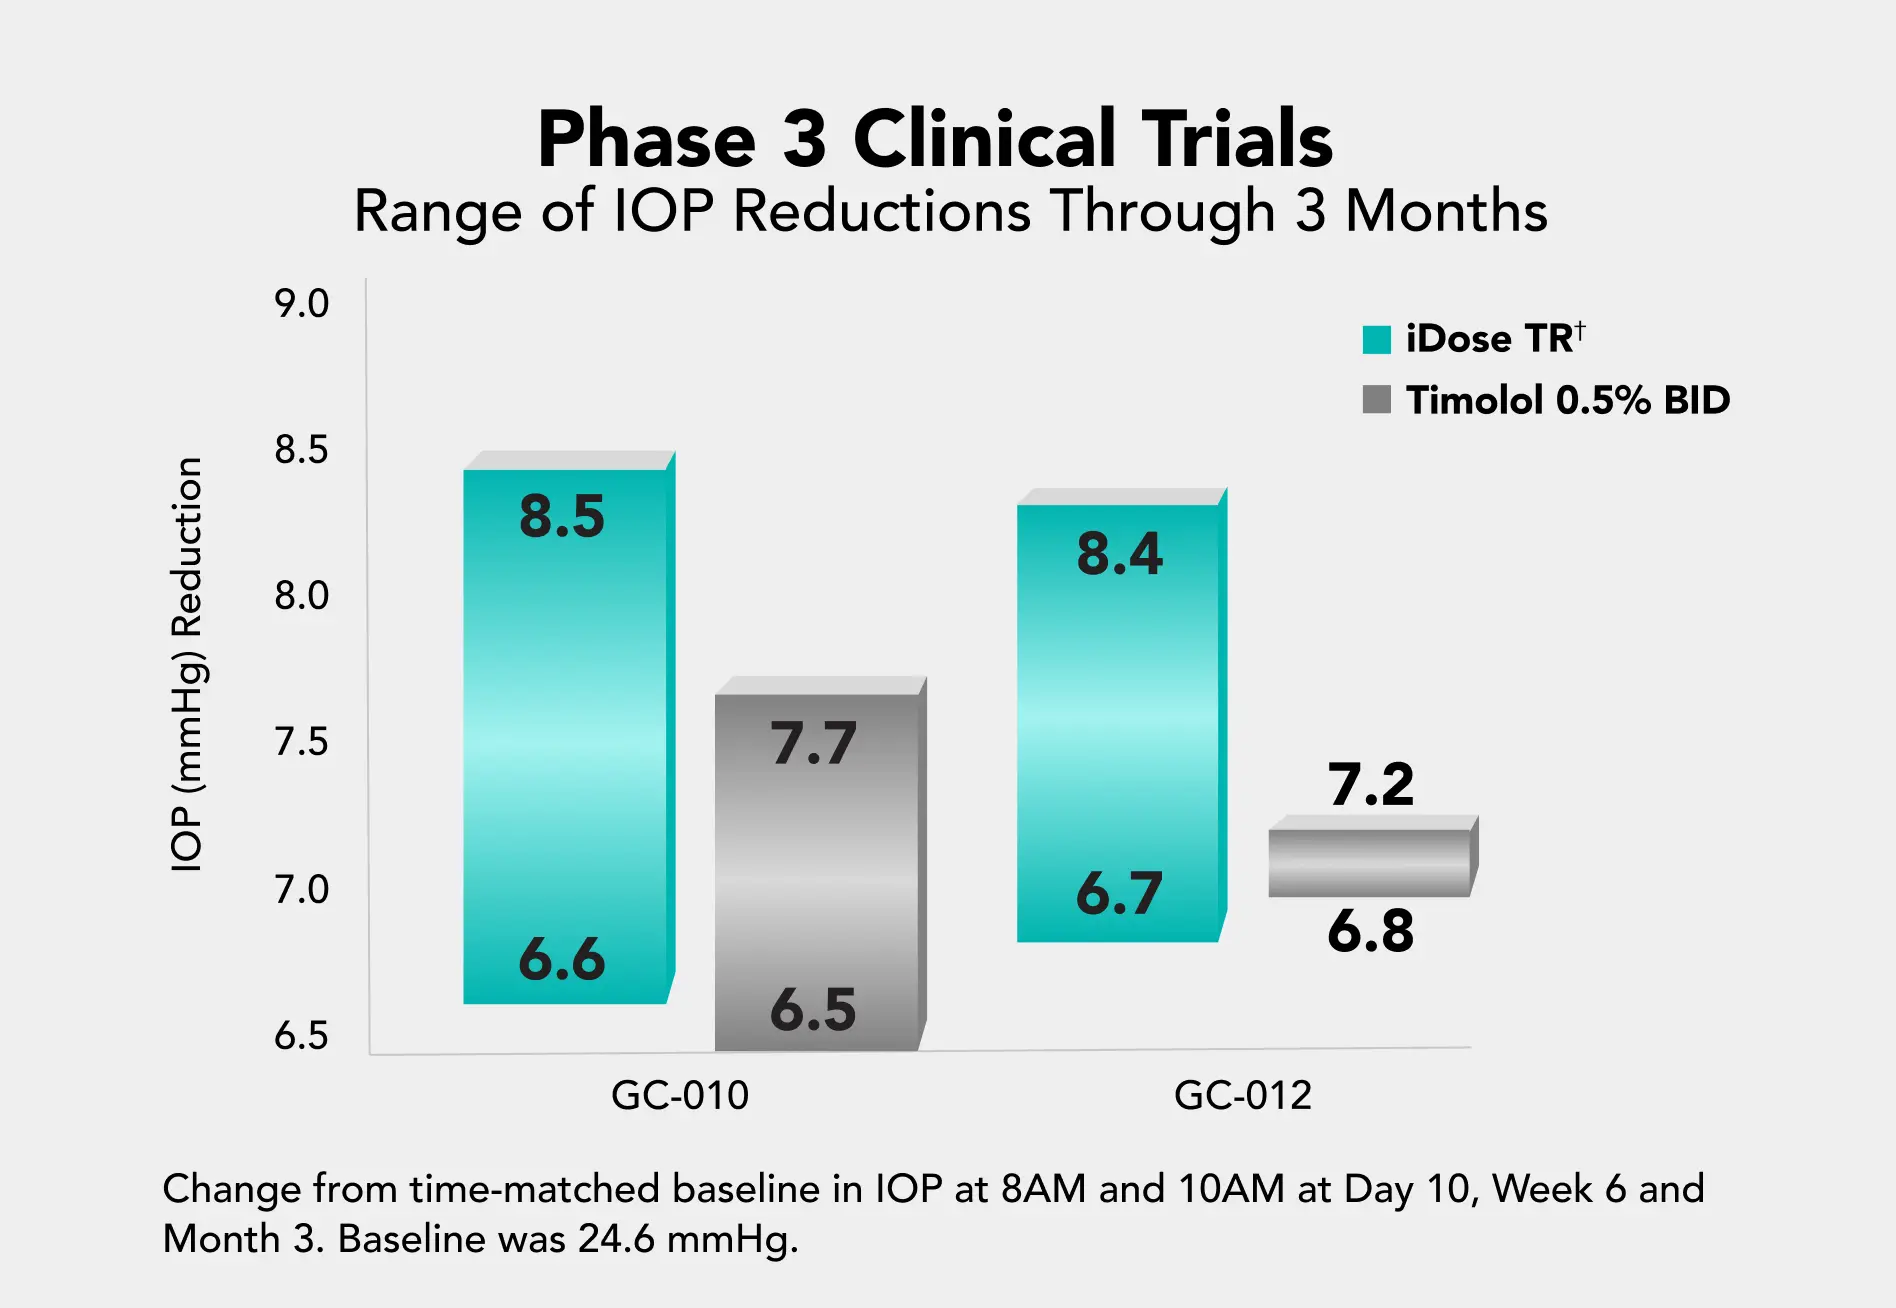 Phase 3 Clinical Trials graph of the Range of IOP Reductions Through 3 Months.